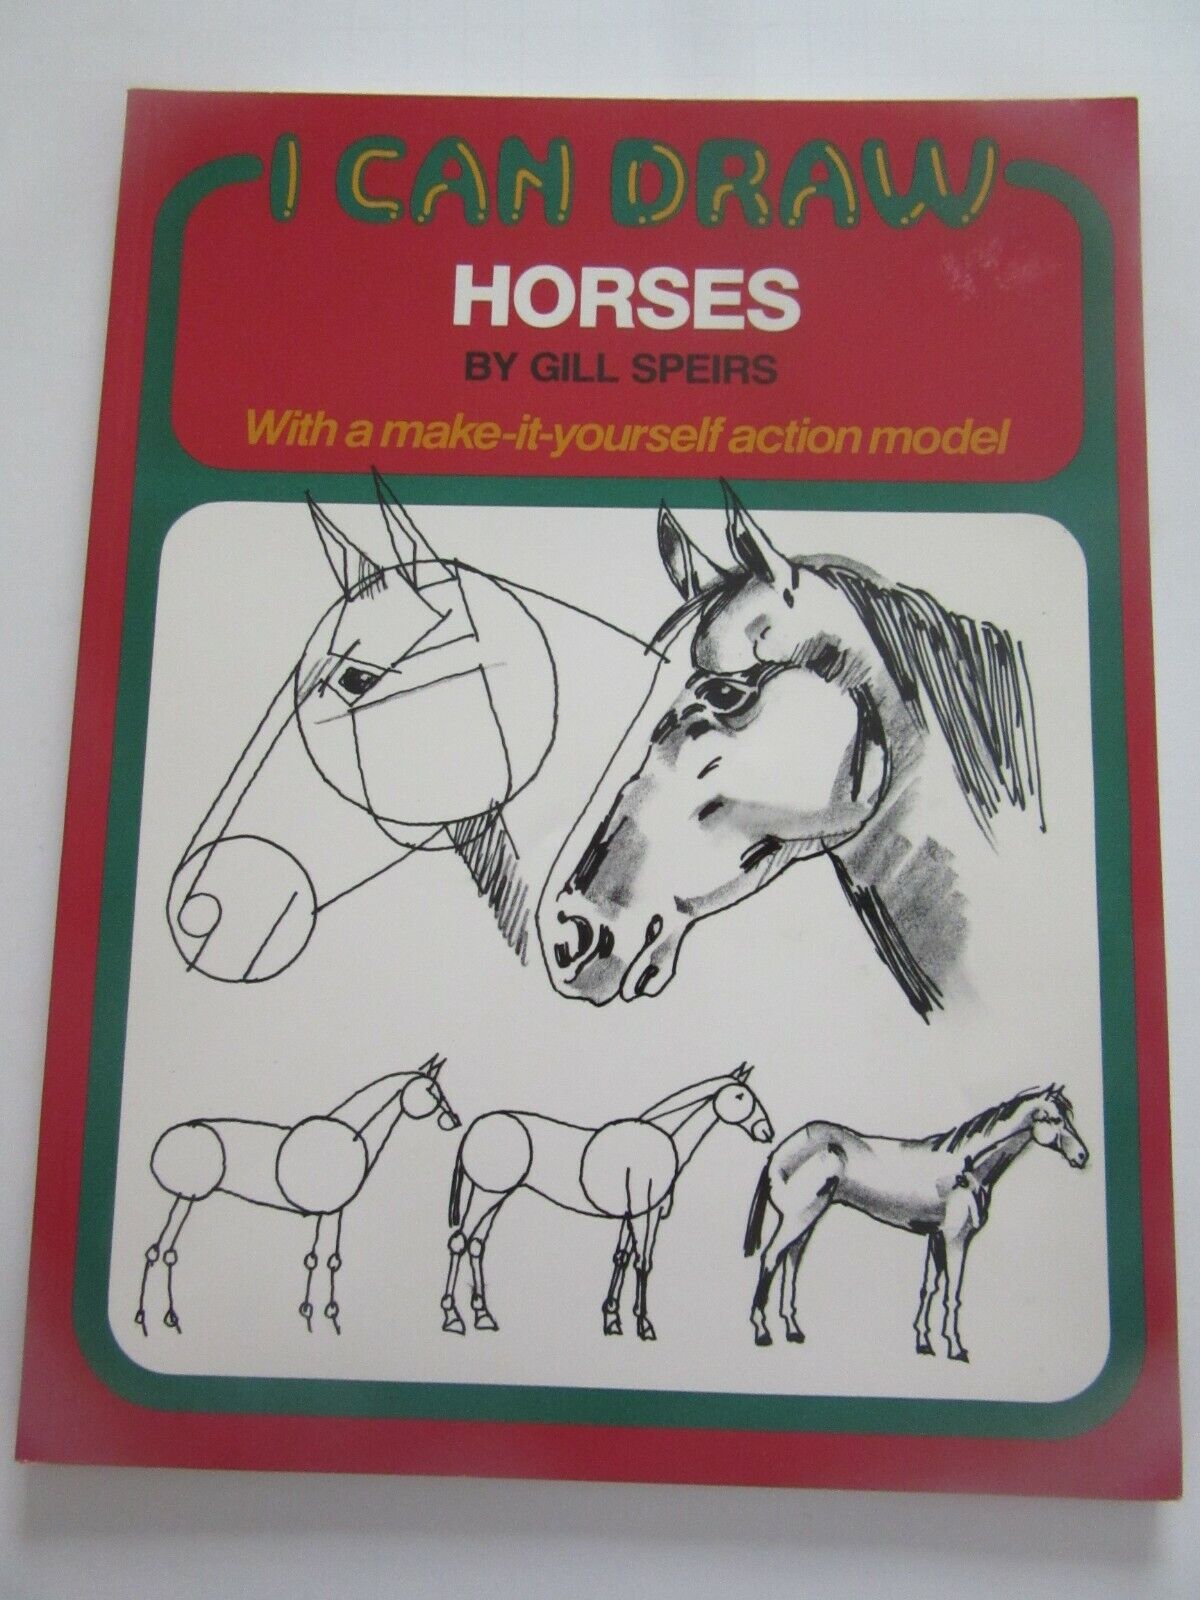 I Can Draw Horses by Gill Speirs with a make-it-yourself action